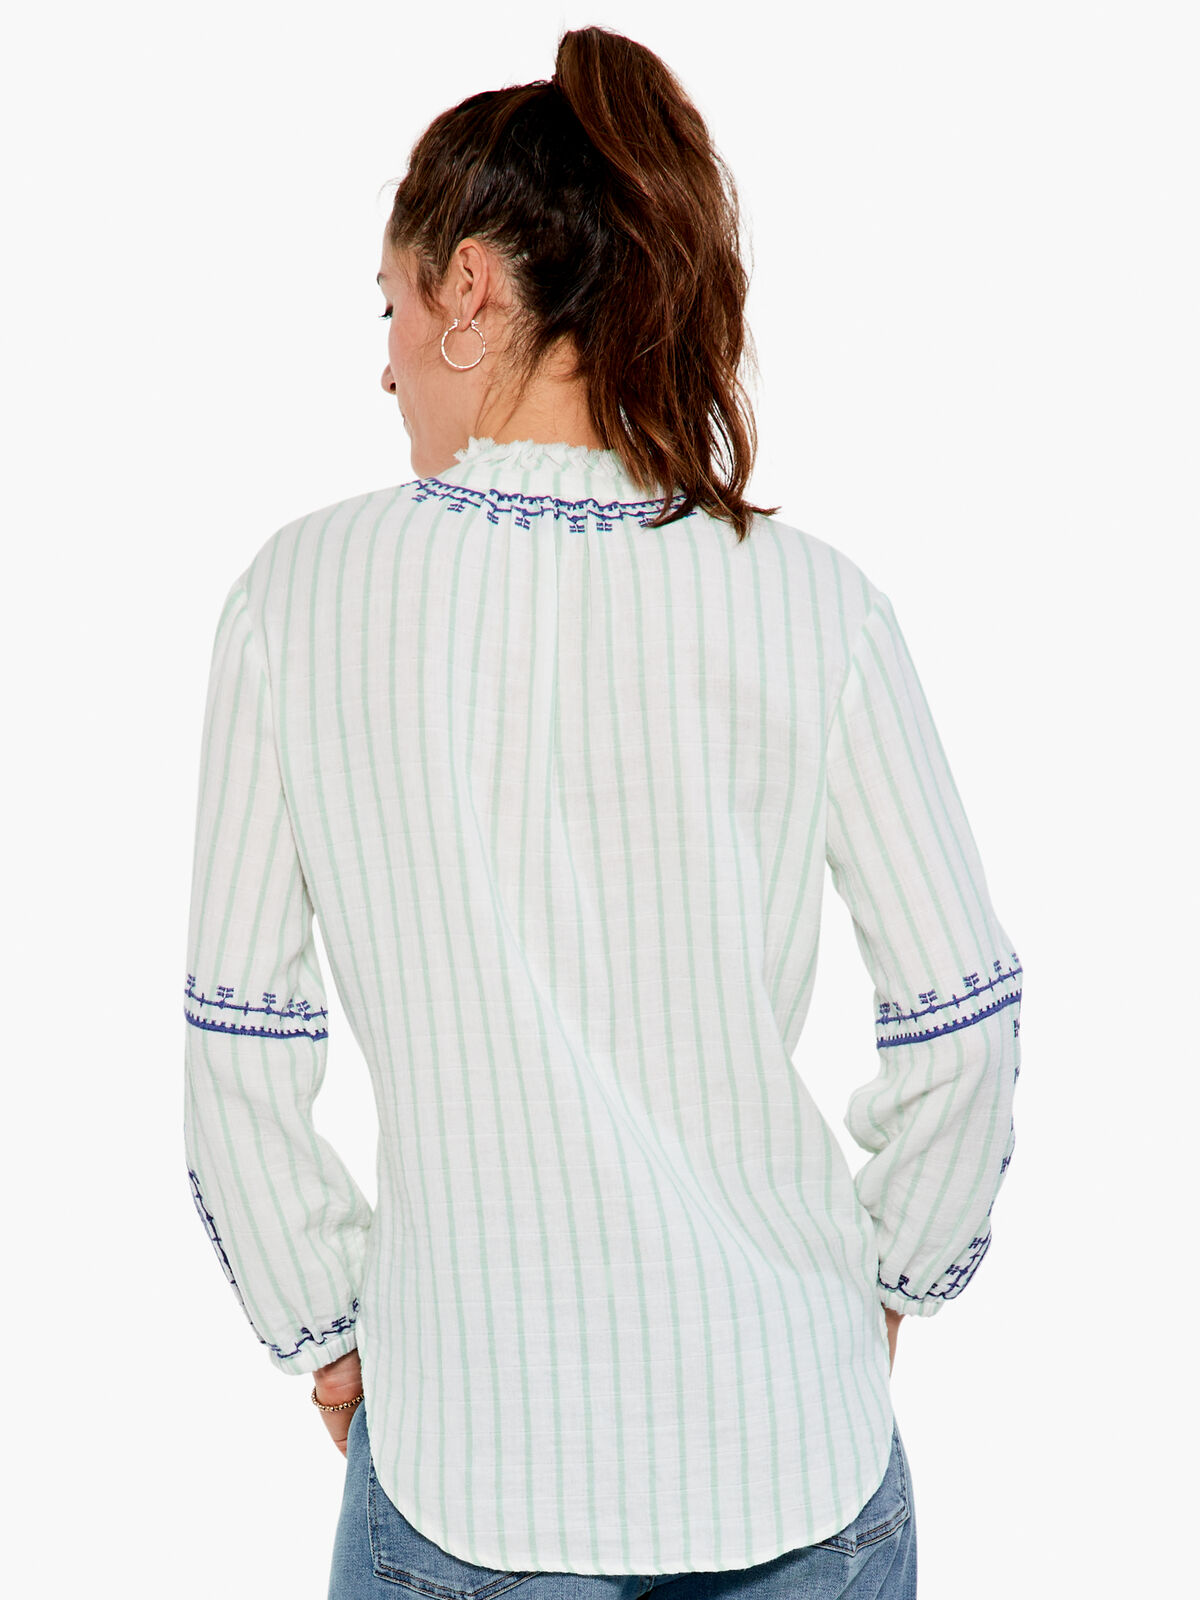 Embroidered Terrace Top